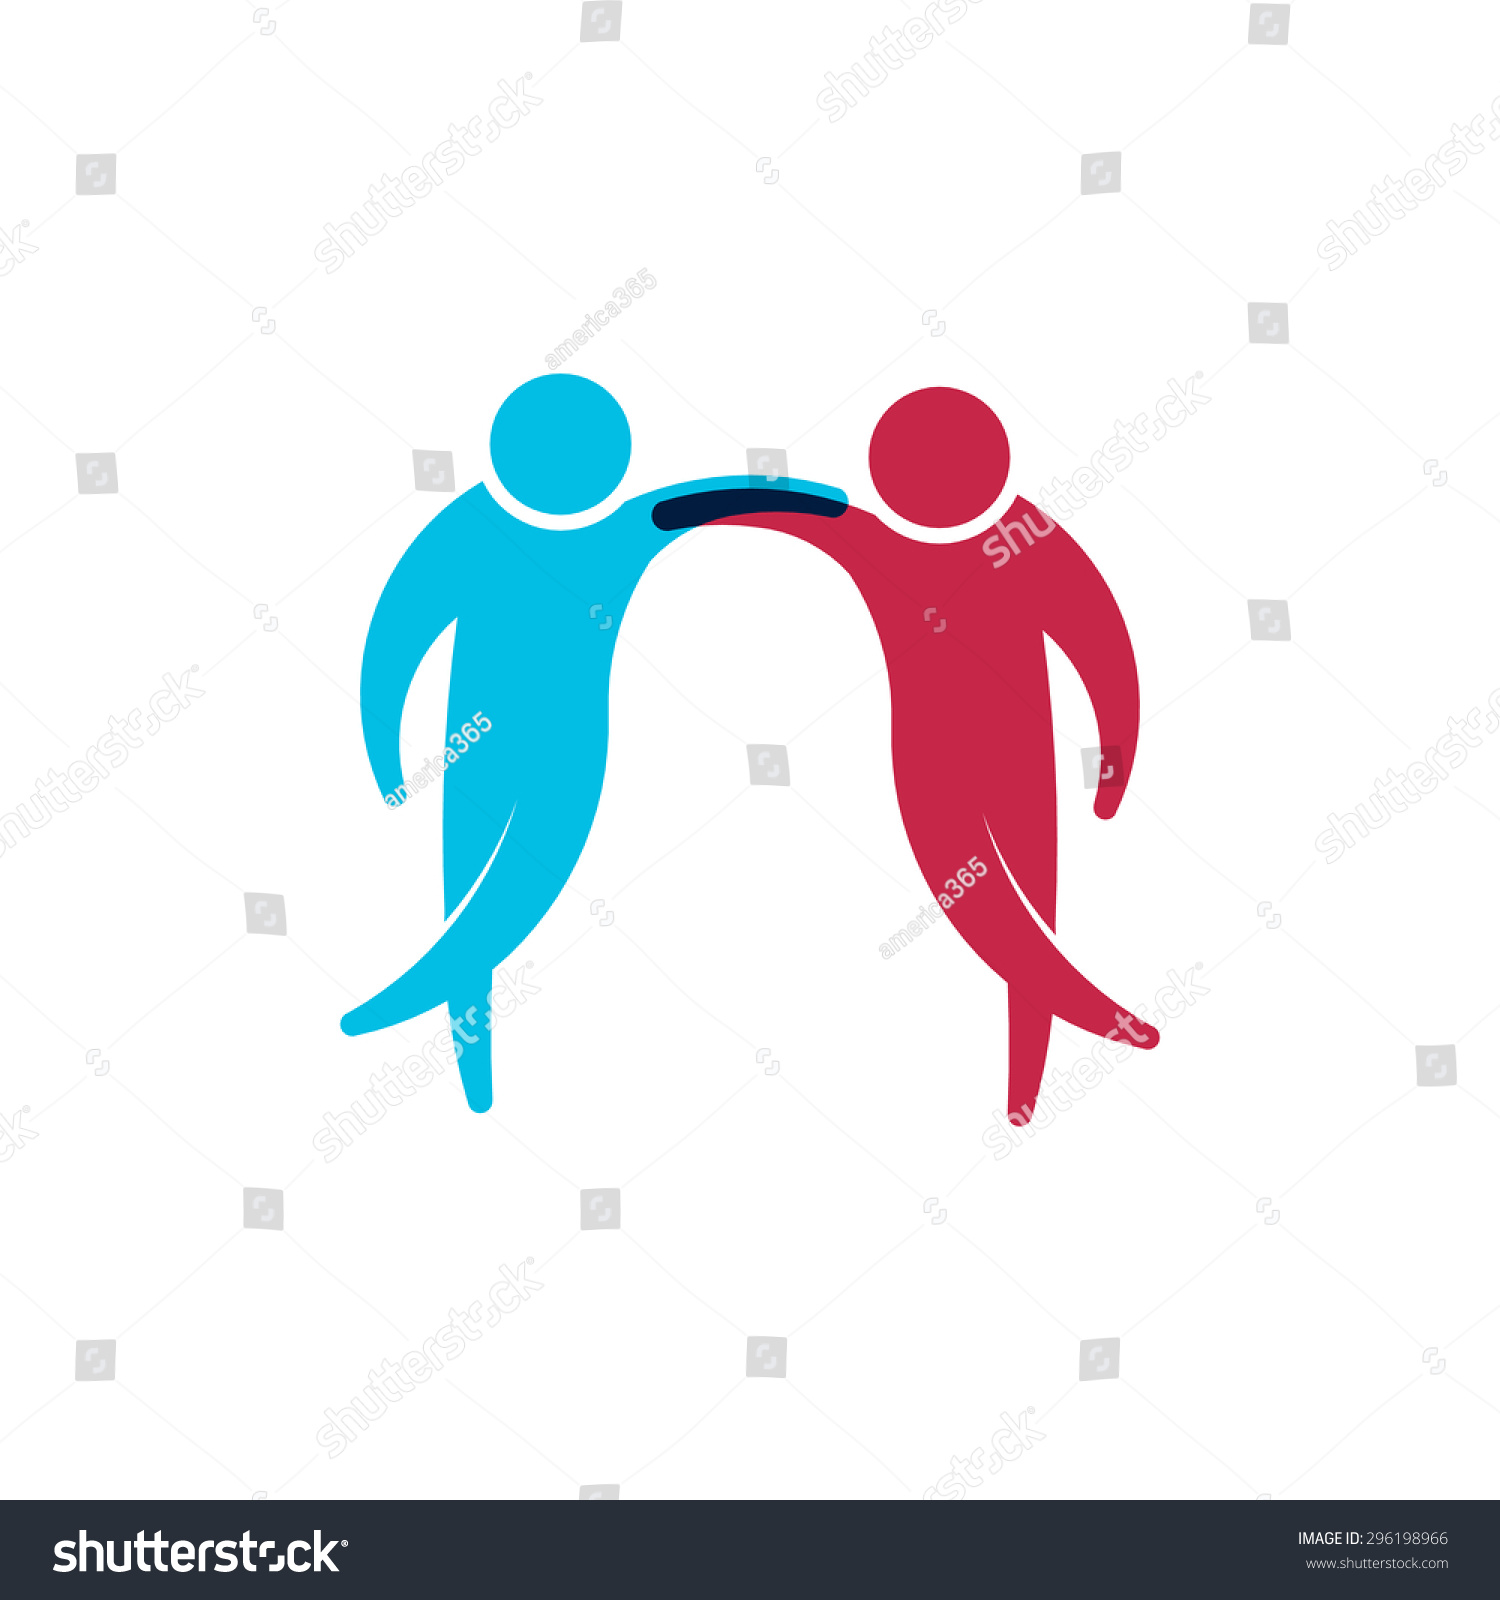 Download People Two Friends Logo Stock Vector (Royalty Free ...